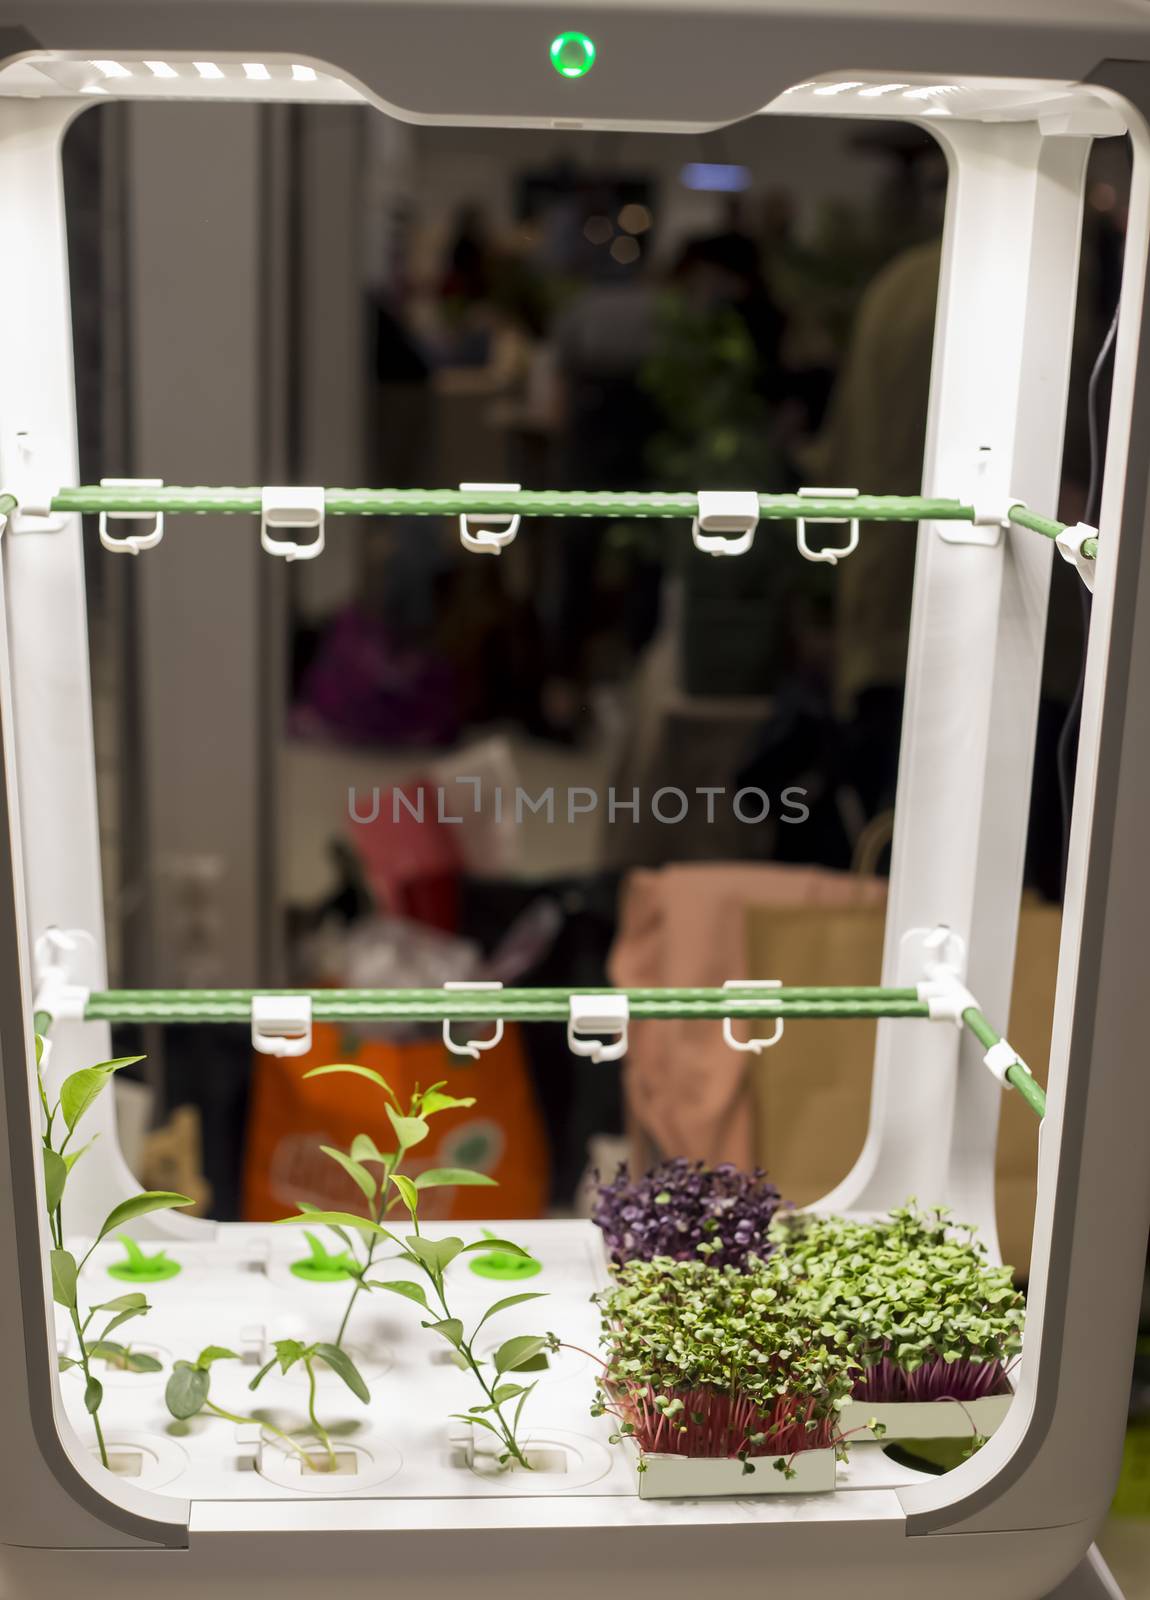 micro farm for growing plants at home, hydroponics with microgreen sprouts, by galinasharapova